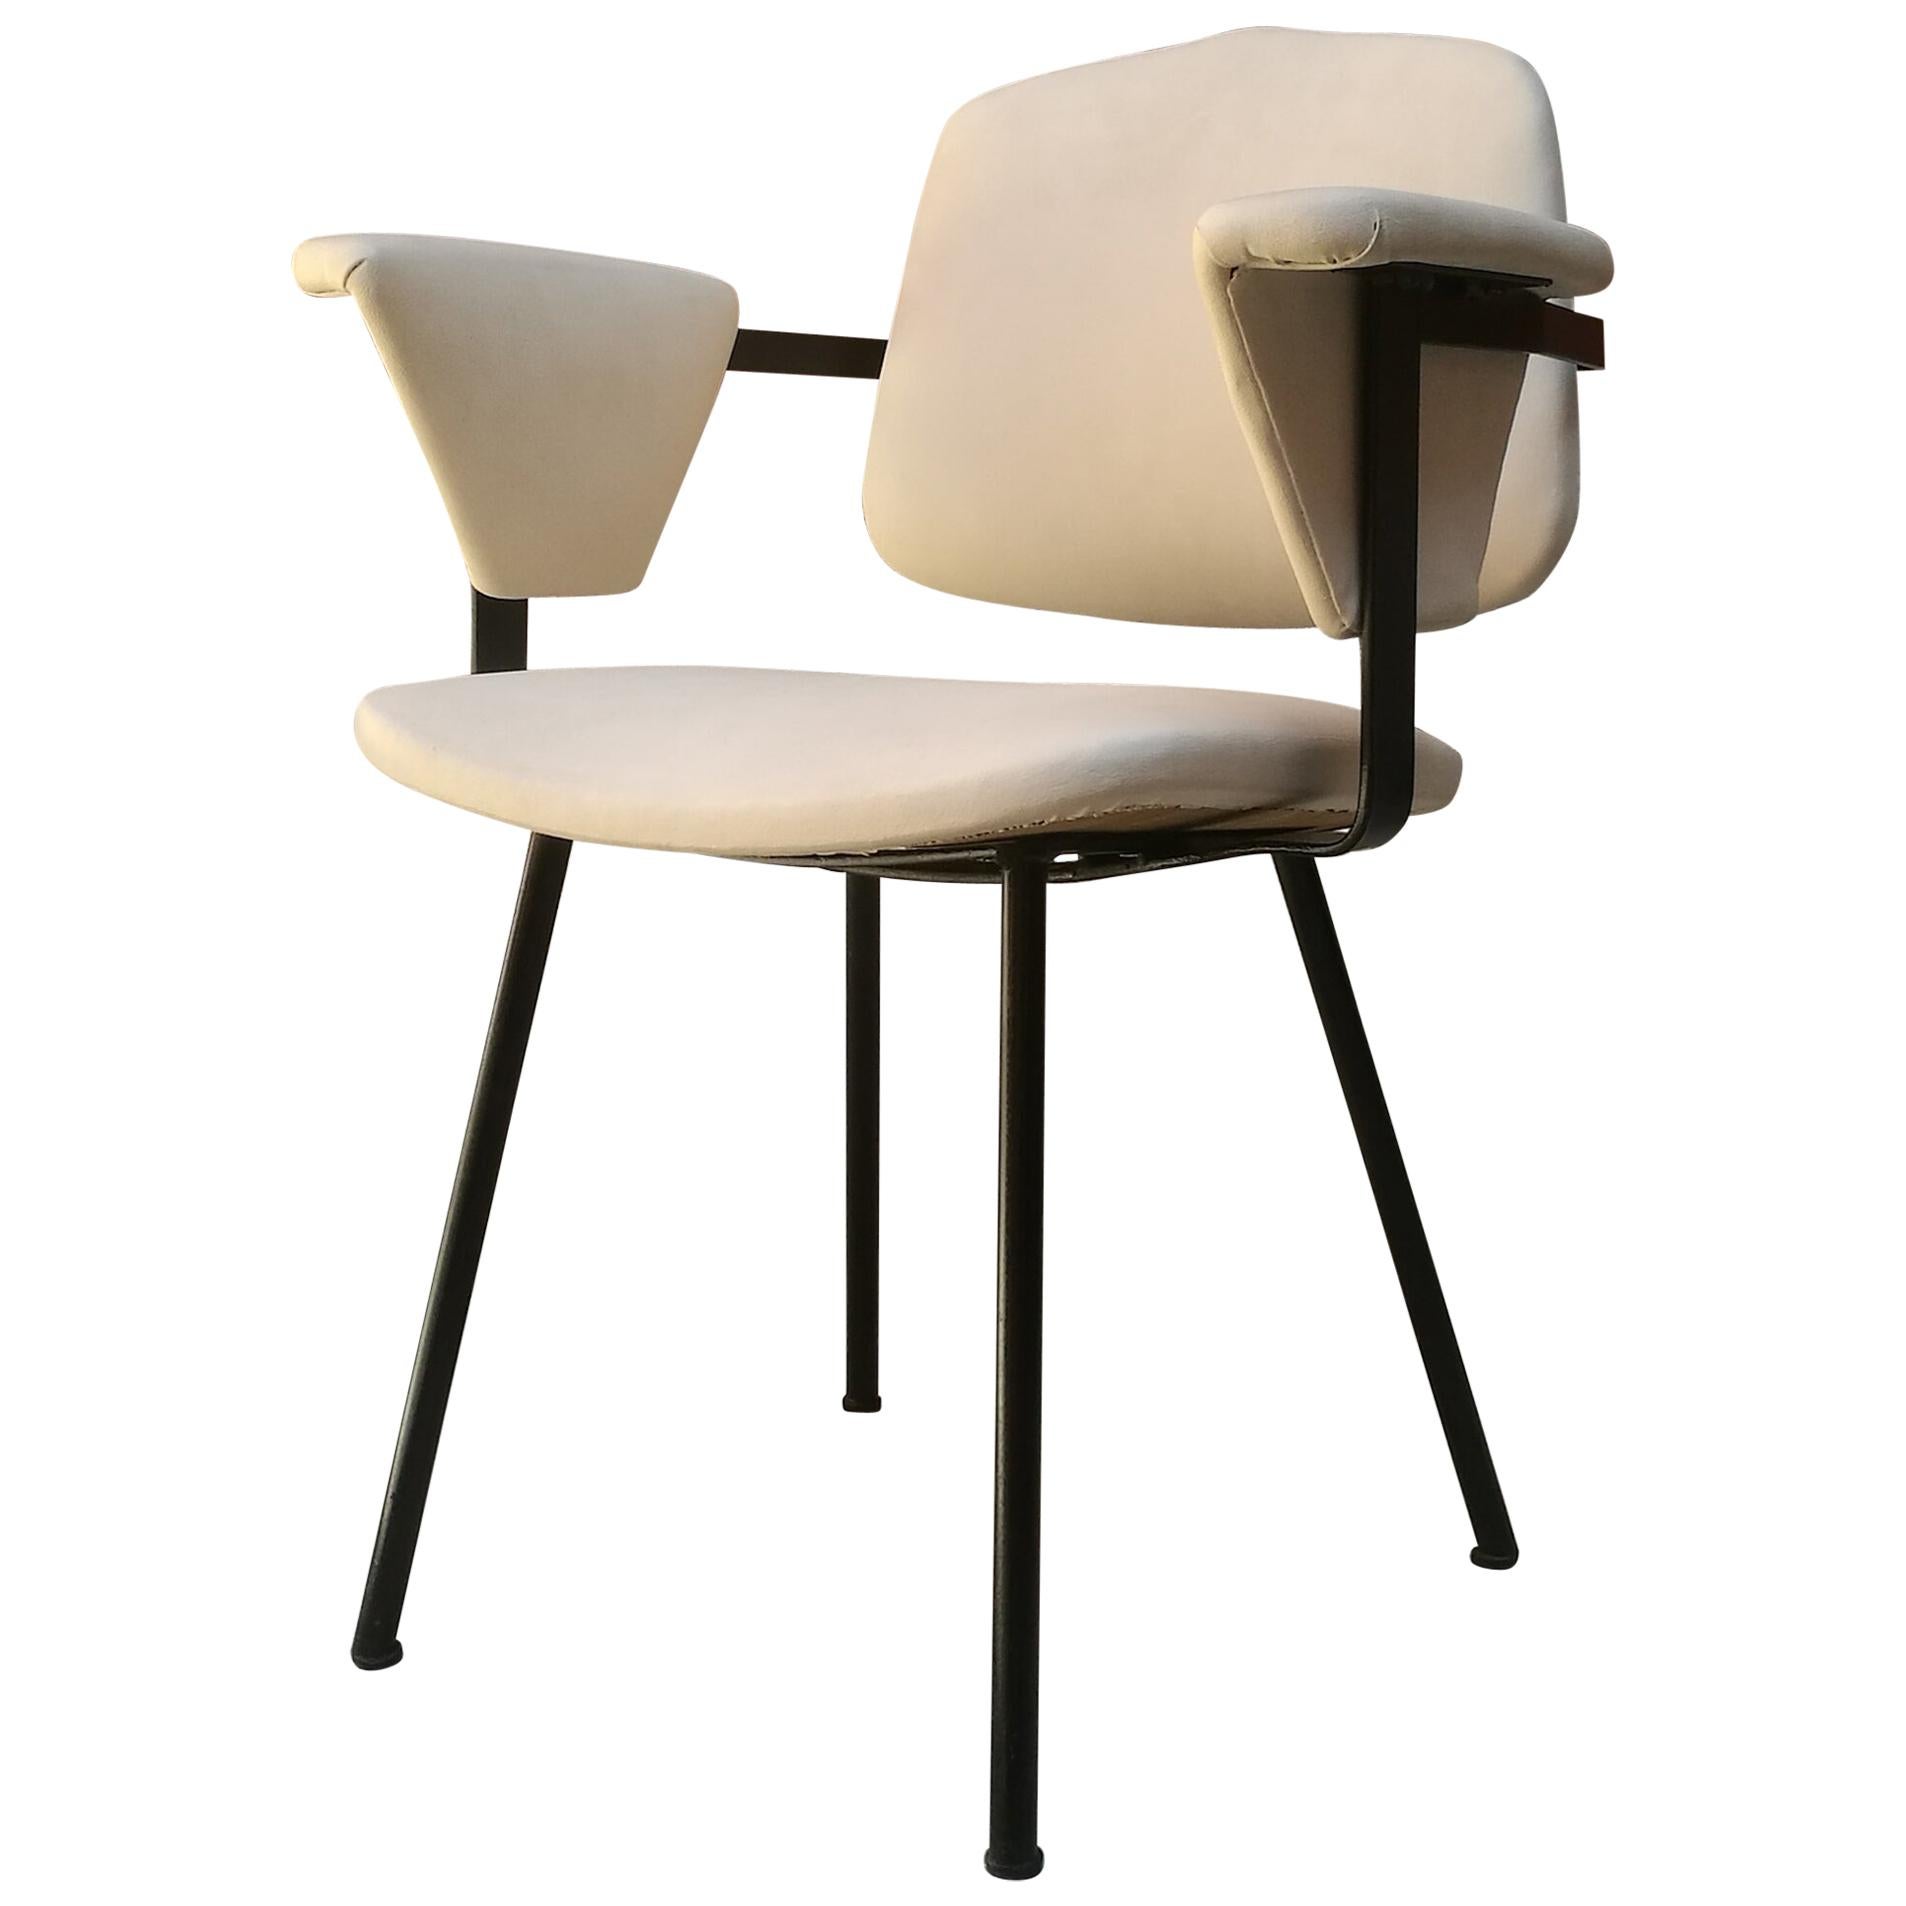 Italian Metal and White Leather Desk Chair with Armrests, 1960s